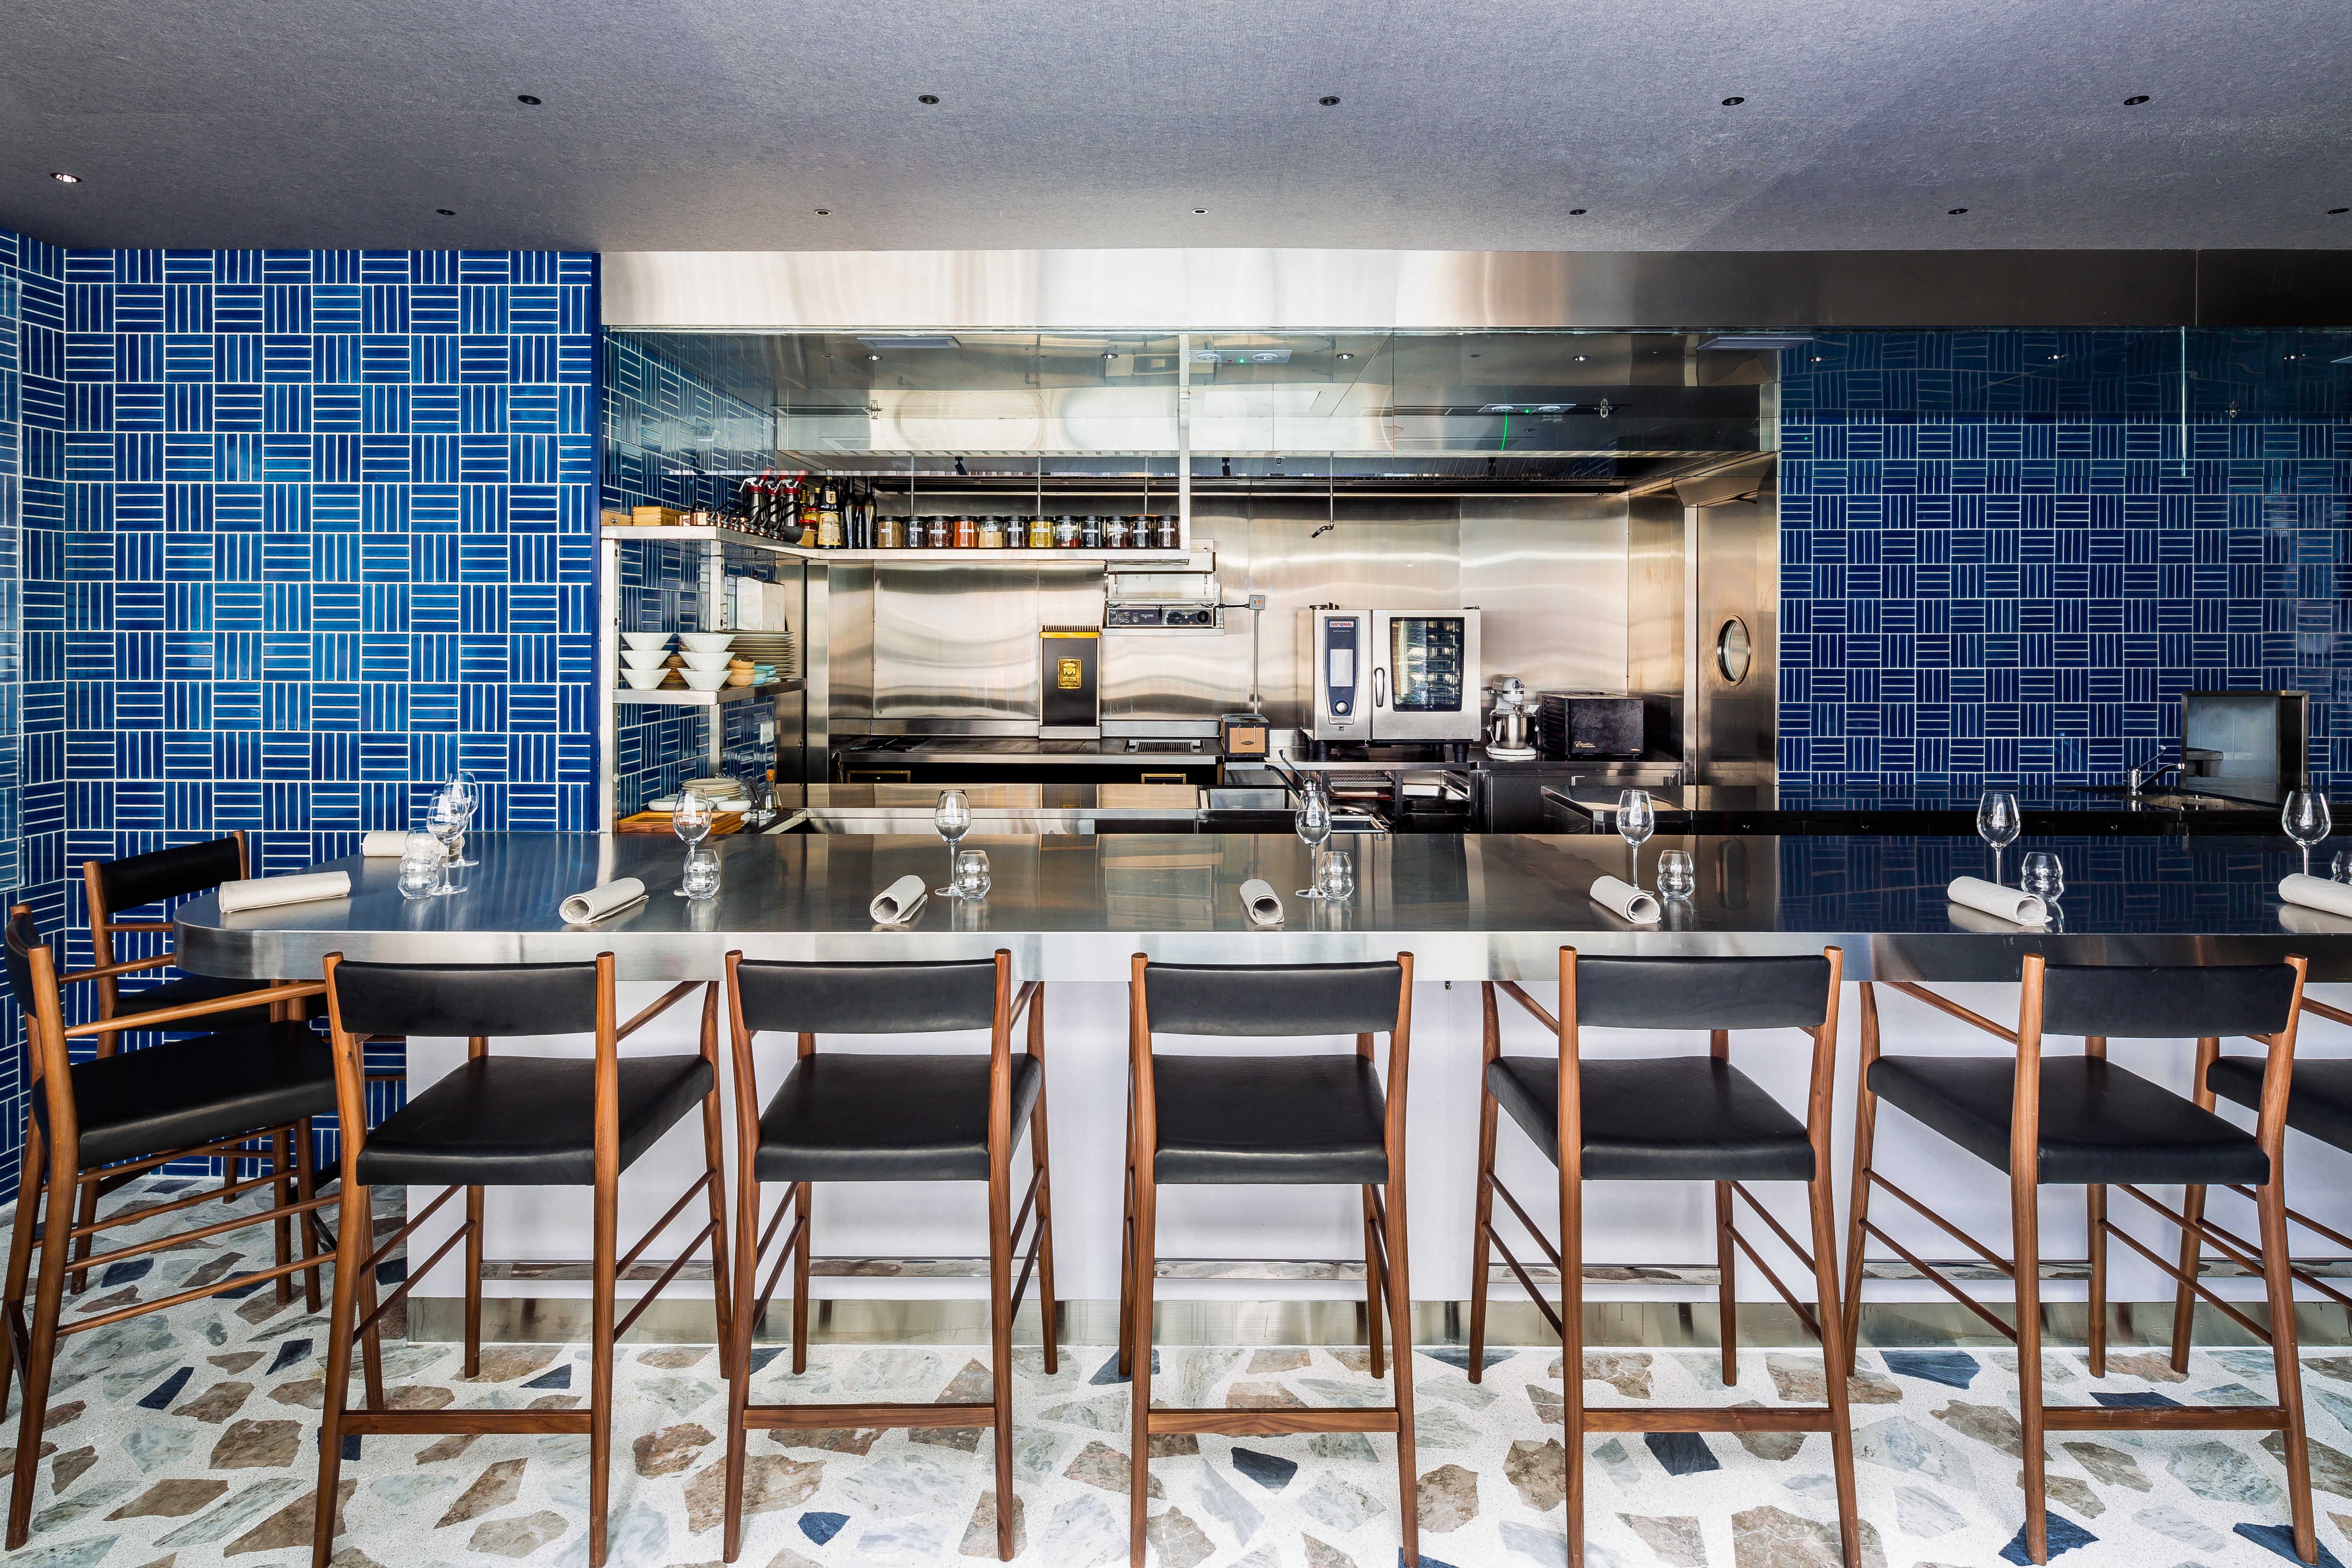 Mono has an open kitchen with plenty of counter seats. Photos: handouts